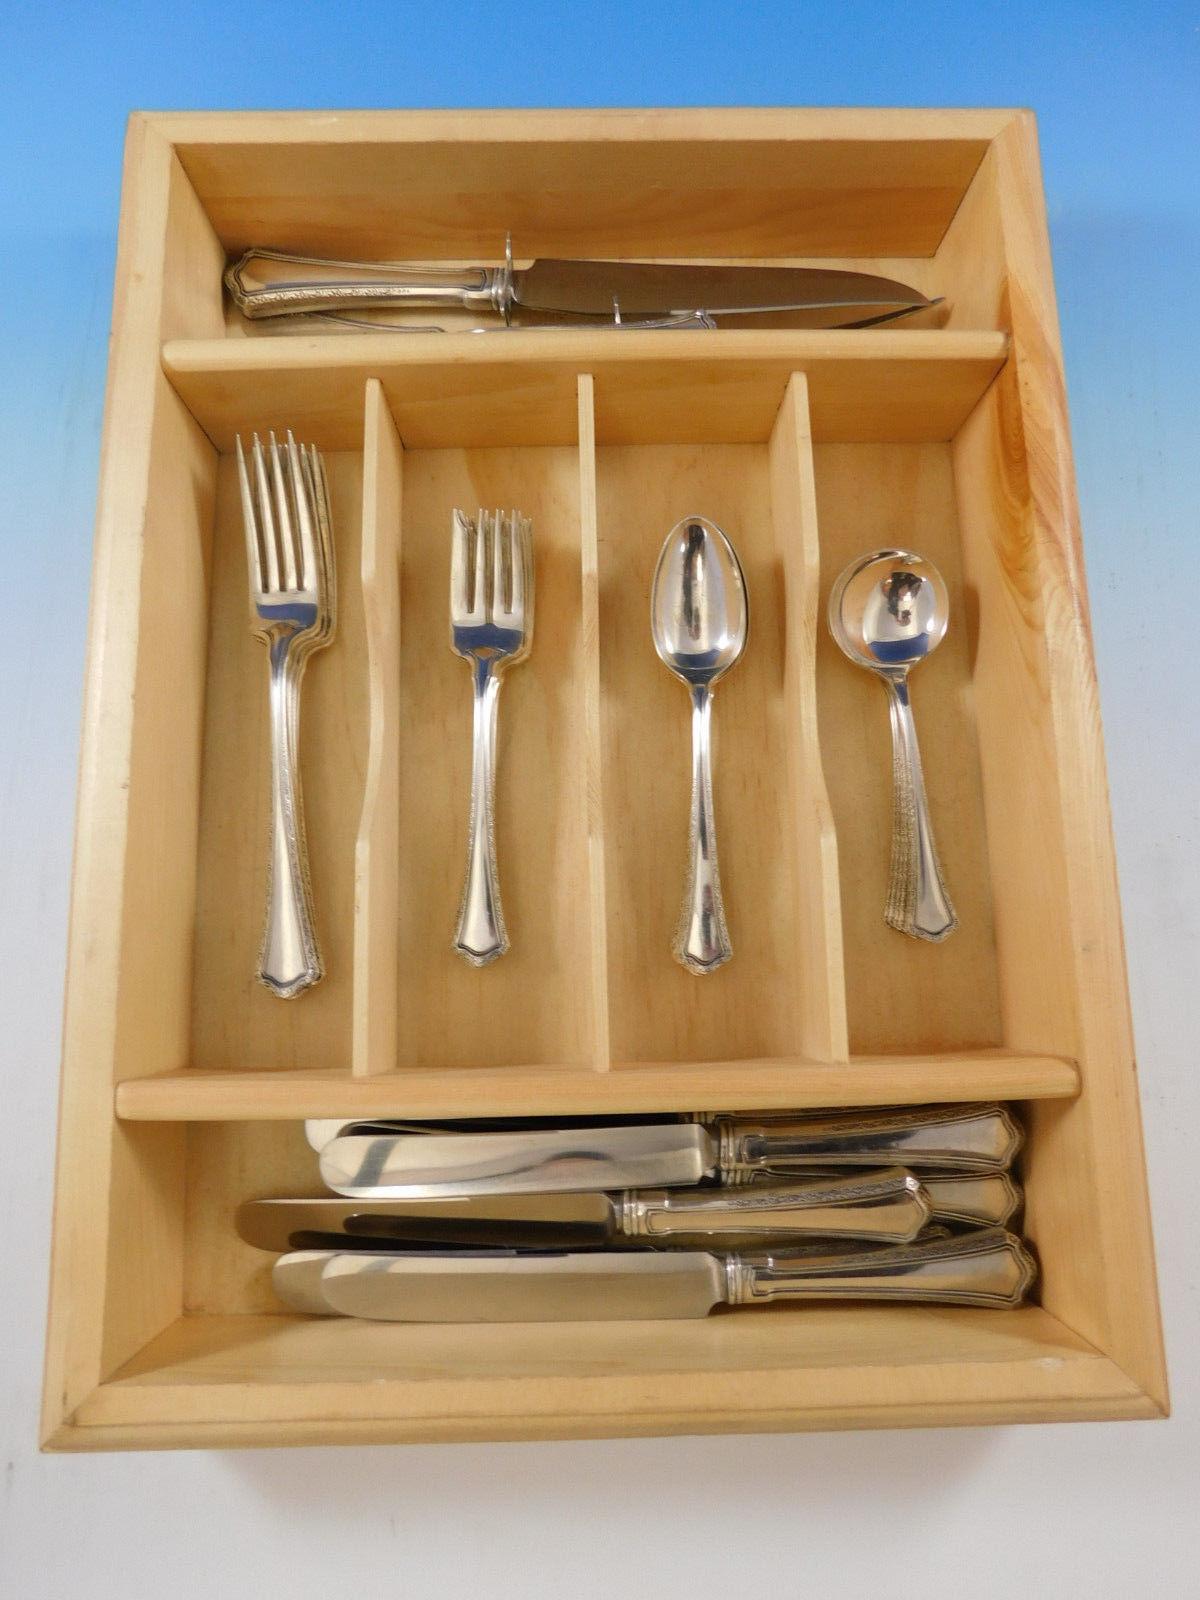 Madison by Wallace sterling silver flatware set - 33 pieces. Great starter set! This set includes:

Six knives, 8 3/4